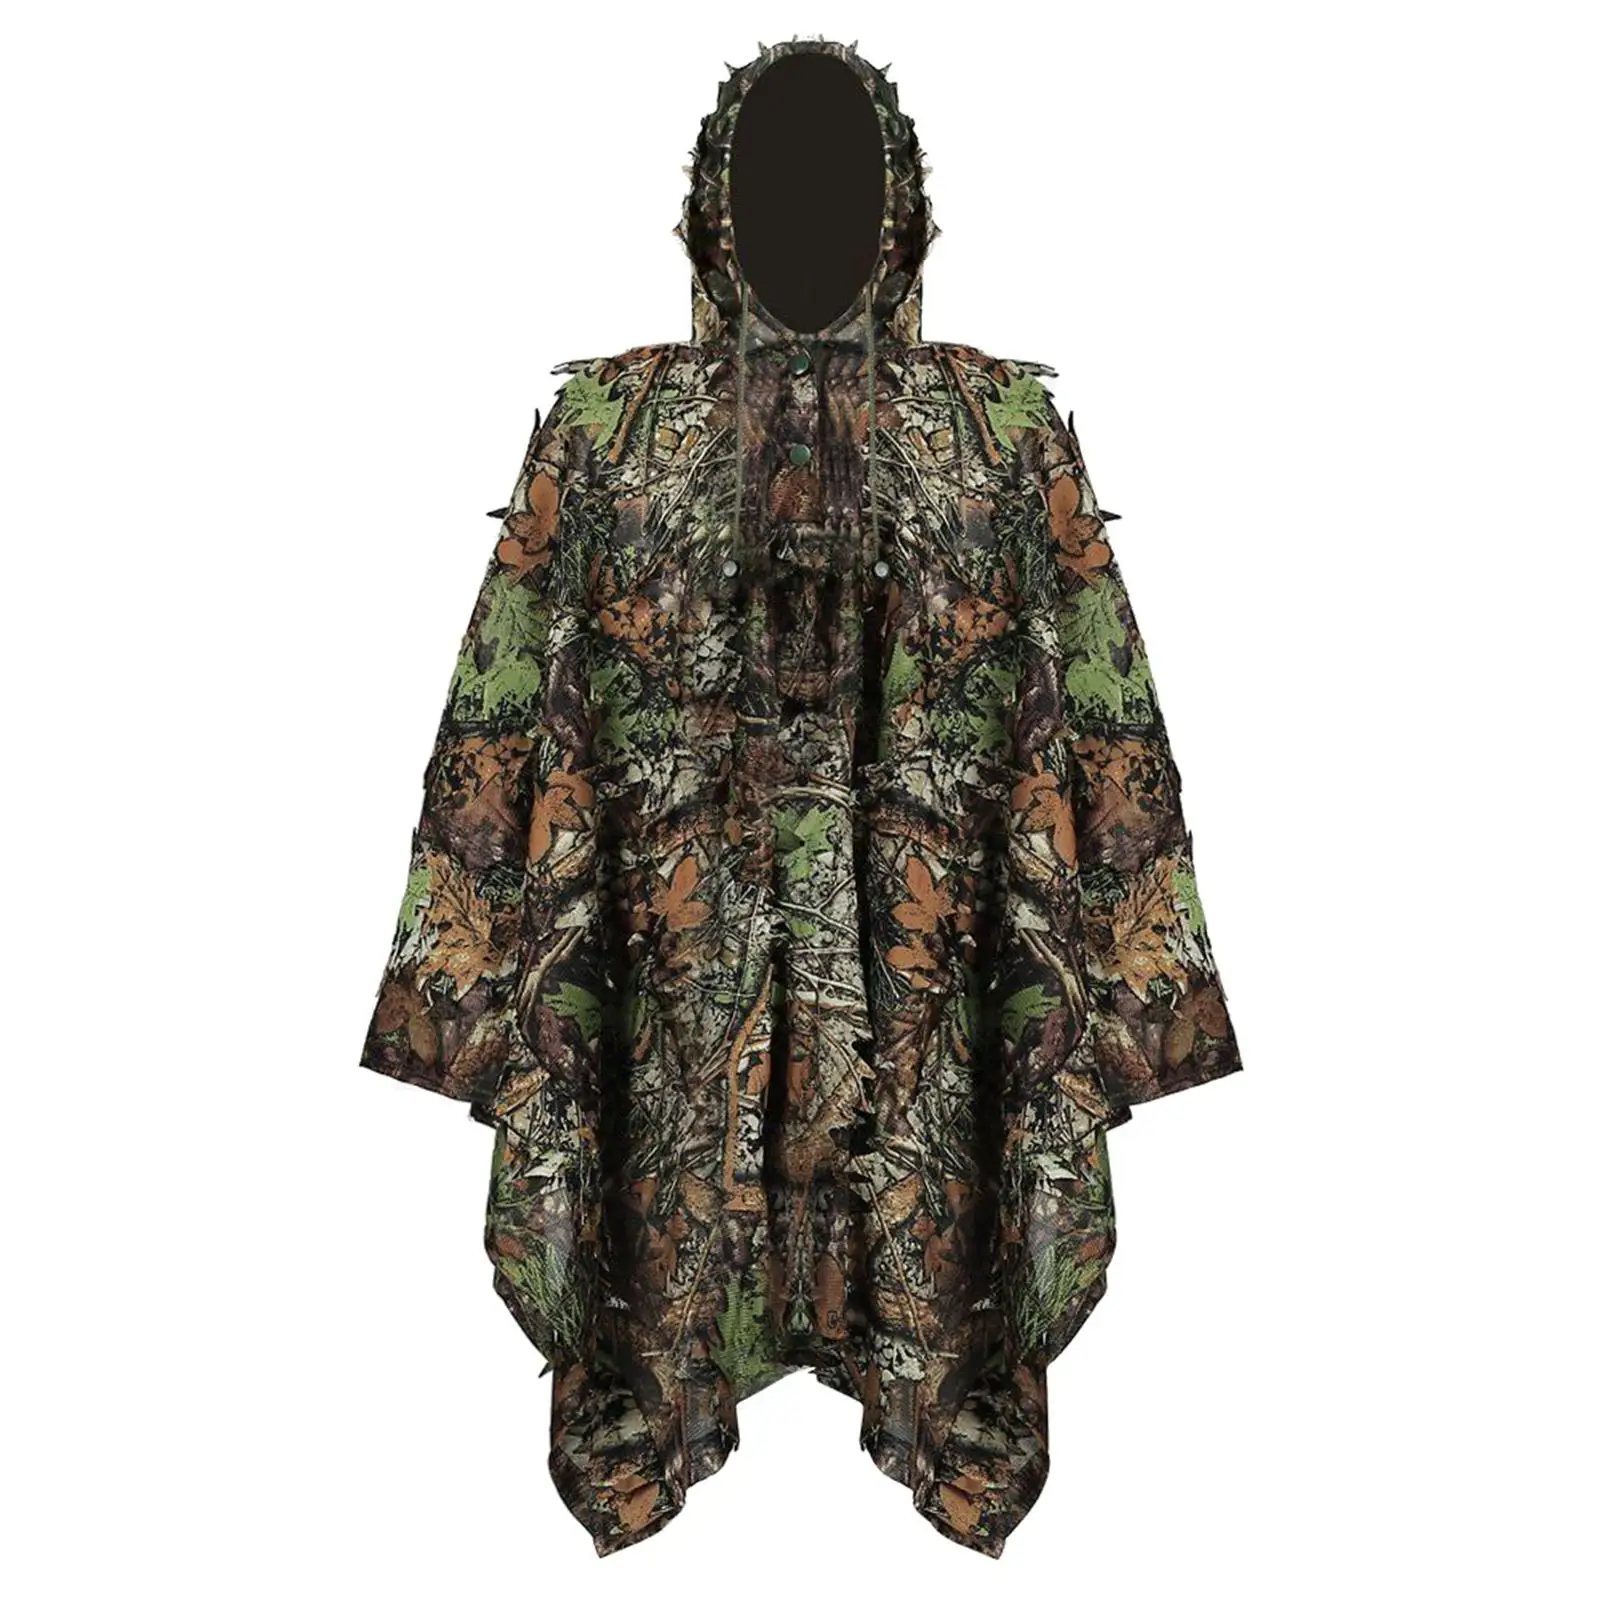 Ghillie Suit for Men Clothes Jacket Hood Woodland Cosplay suits Camo Suit for Game Birdwatching Halloween Costume Photography